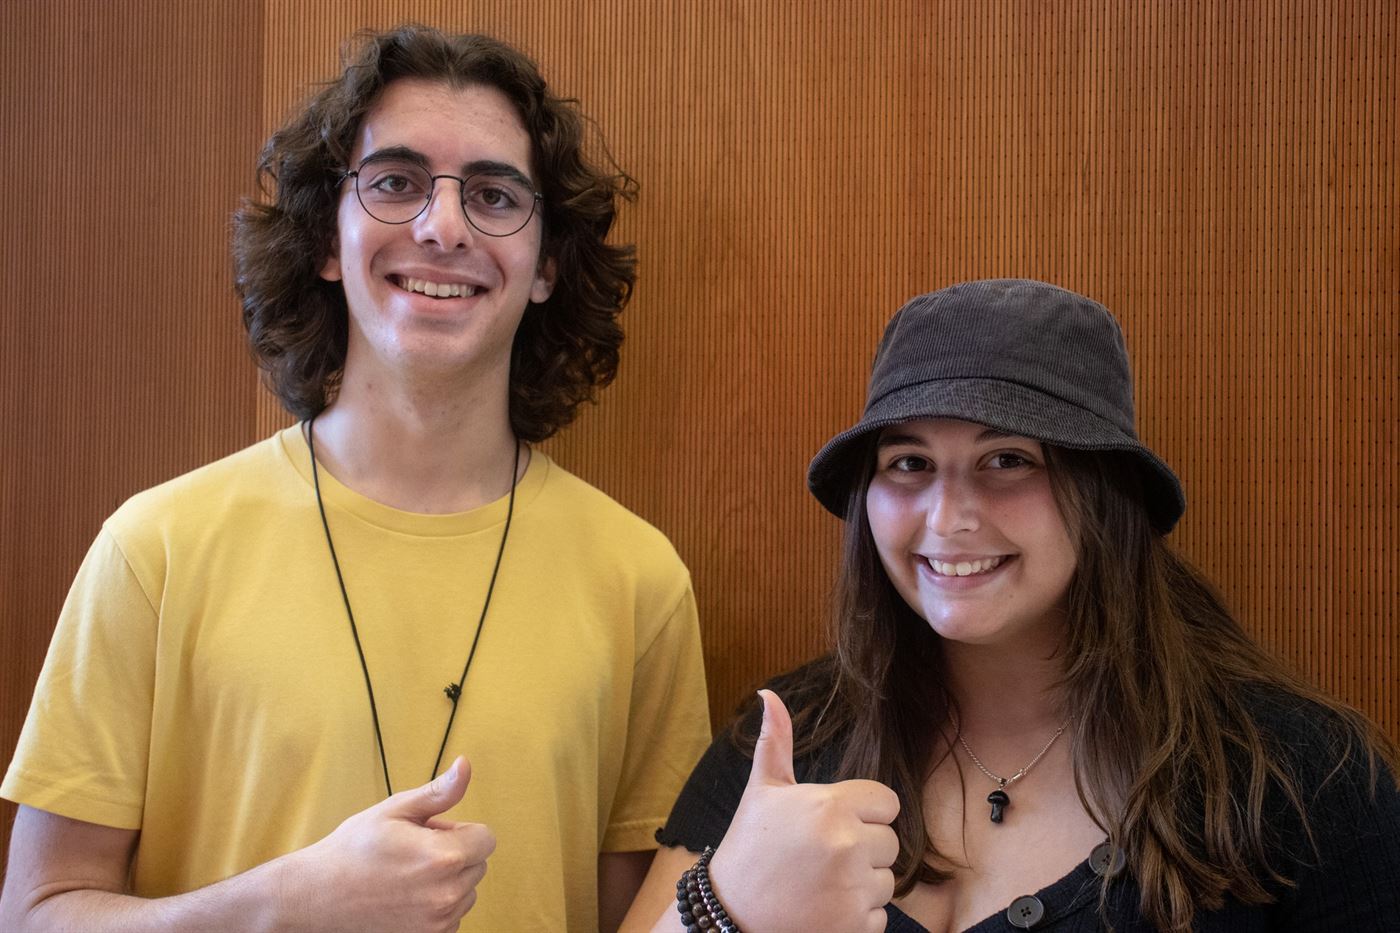 Two freshmen film majors, Samantha Bussinger (right) and Salvatore Sciascia (left) enjoy the festival on their first day of classes. Katie Lawrence | The Montclarion